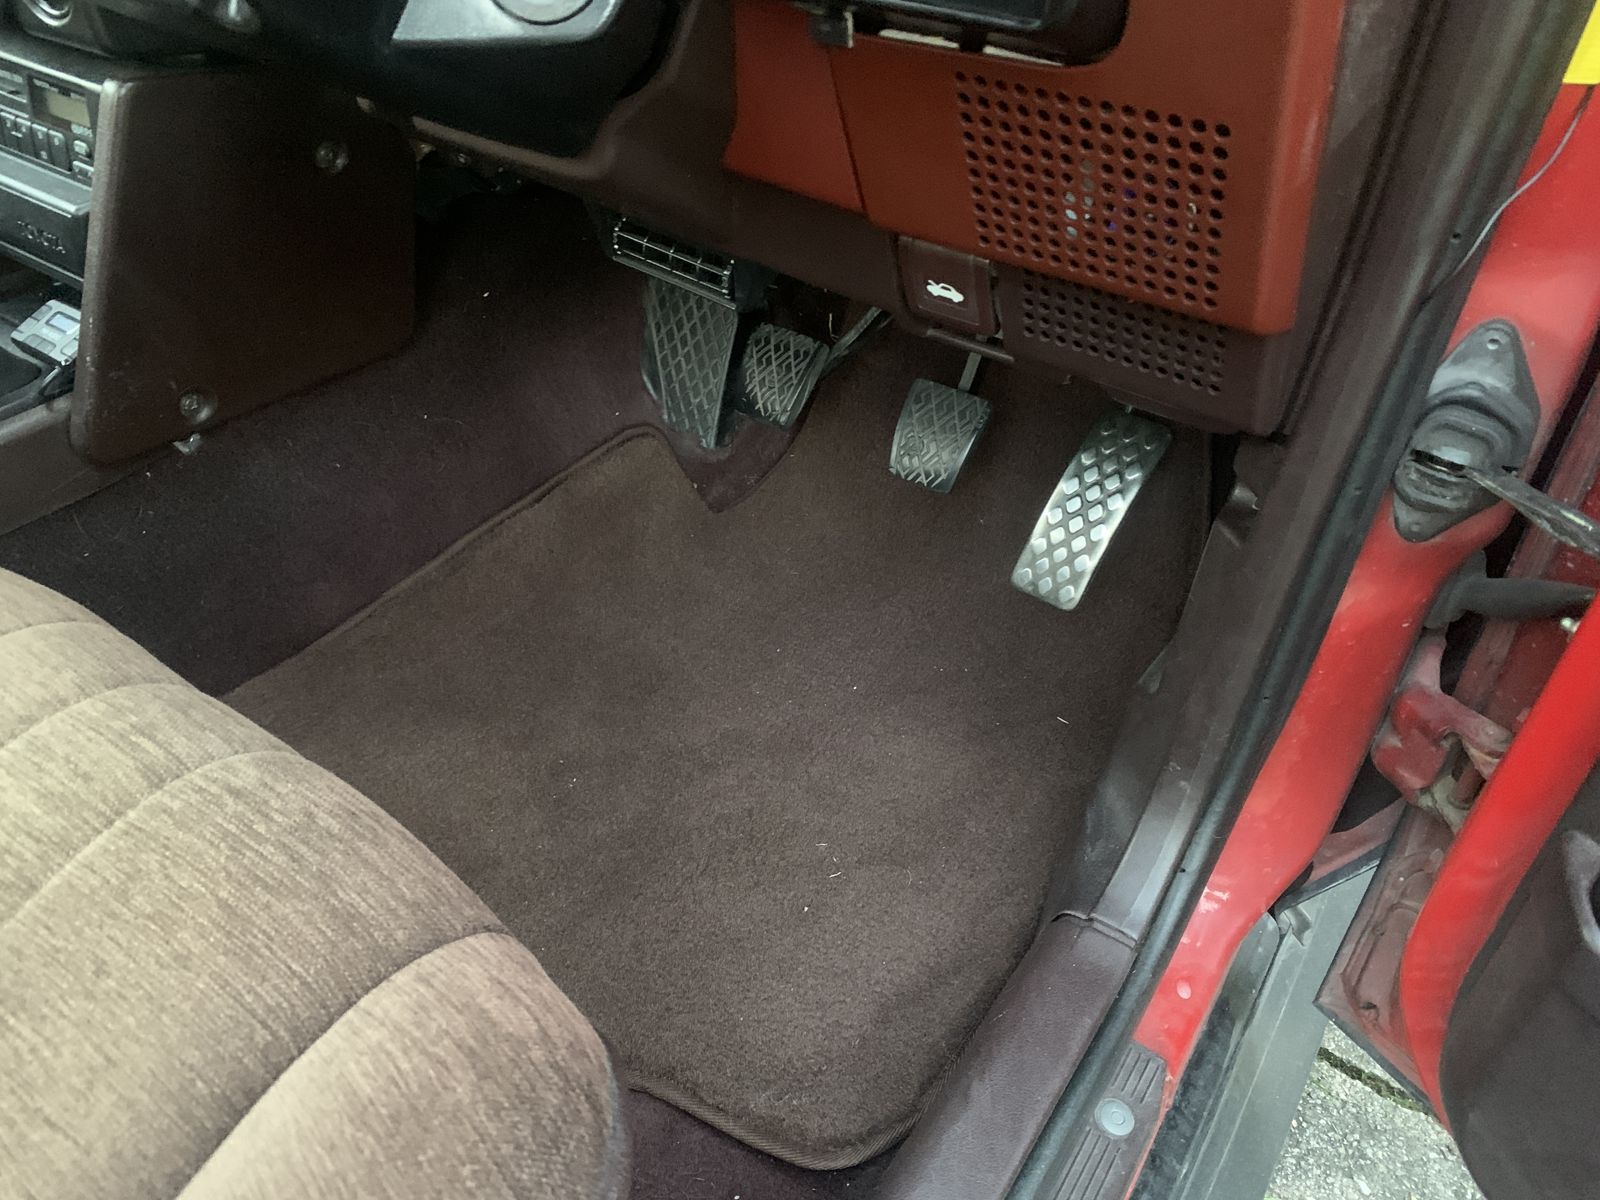 [Image: AEU86 AE86 - Group buy: floor mats at To...ritage.com]